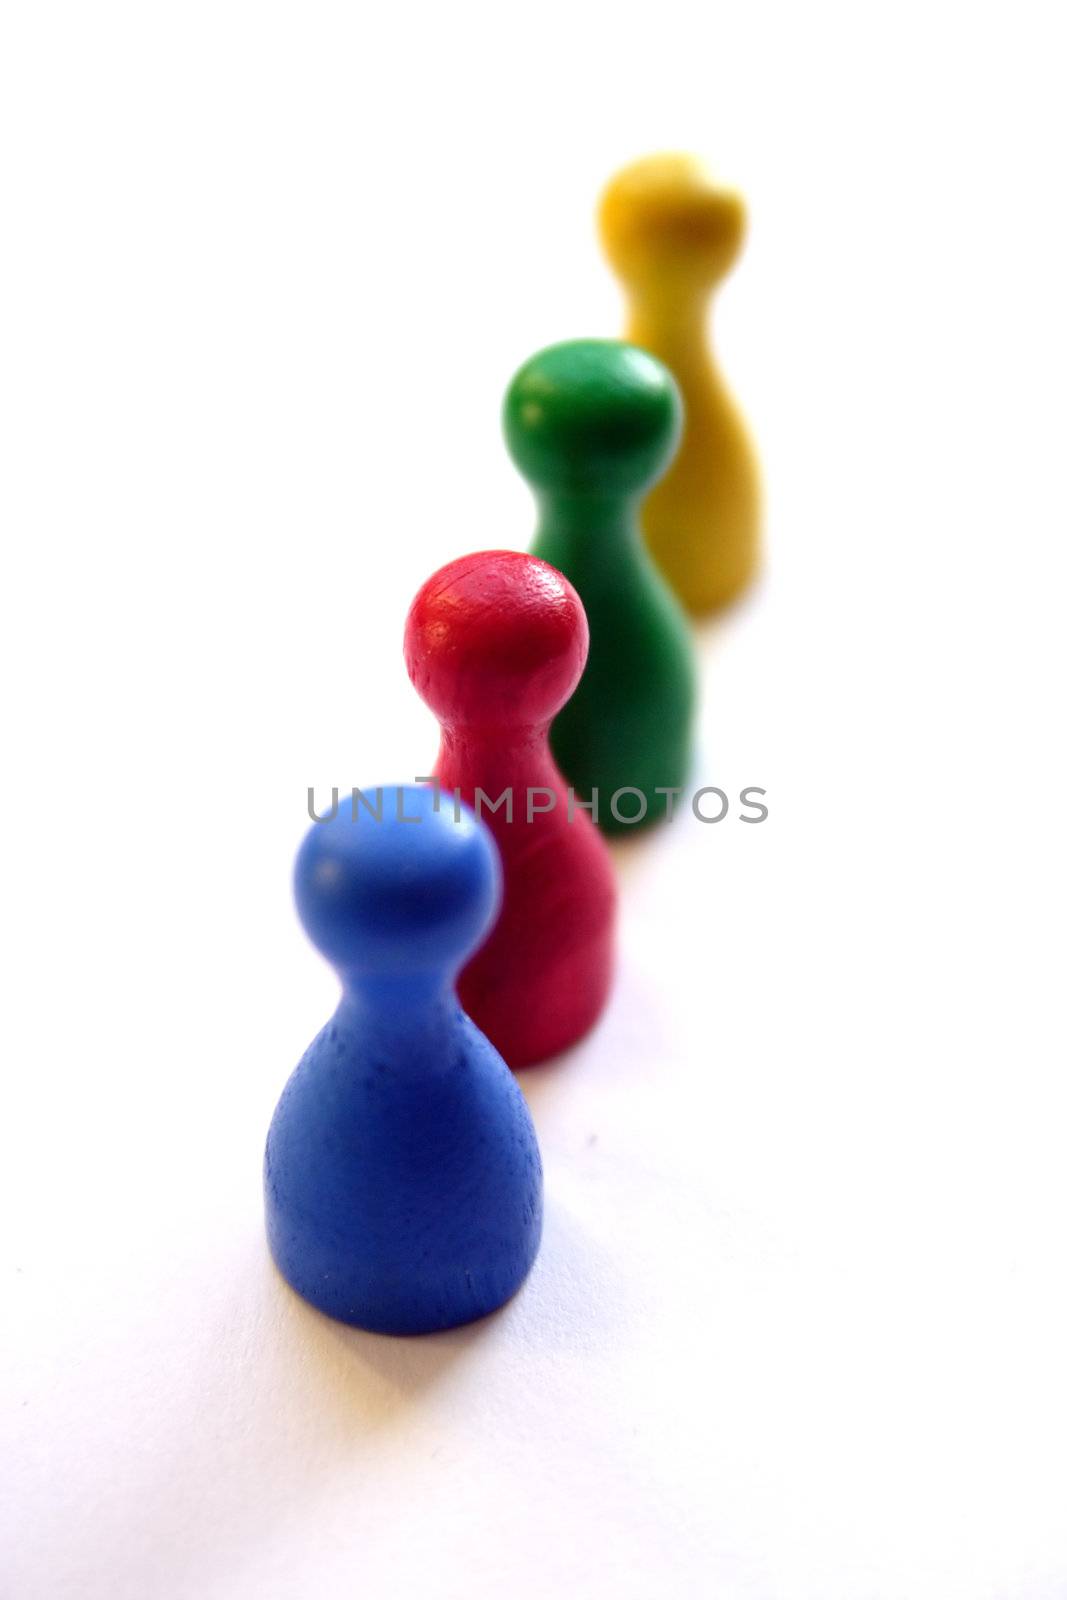 Some different coloured figures standing in one line. All isolated on white background.